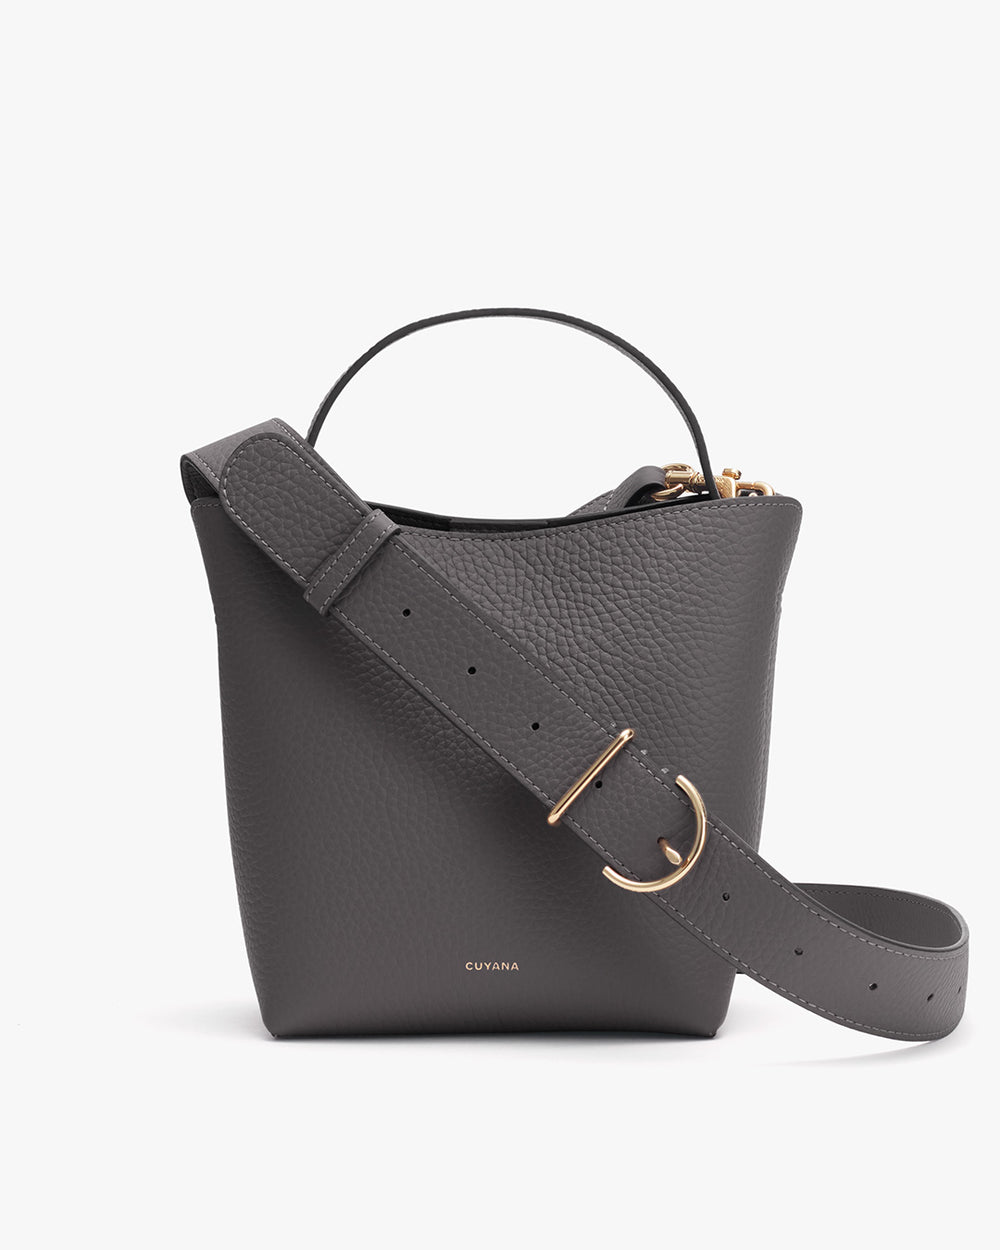 Handbag with a handle, attached strap, and metal accents